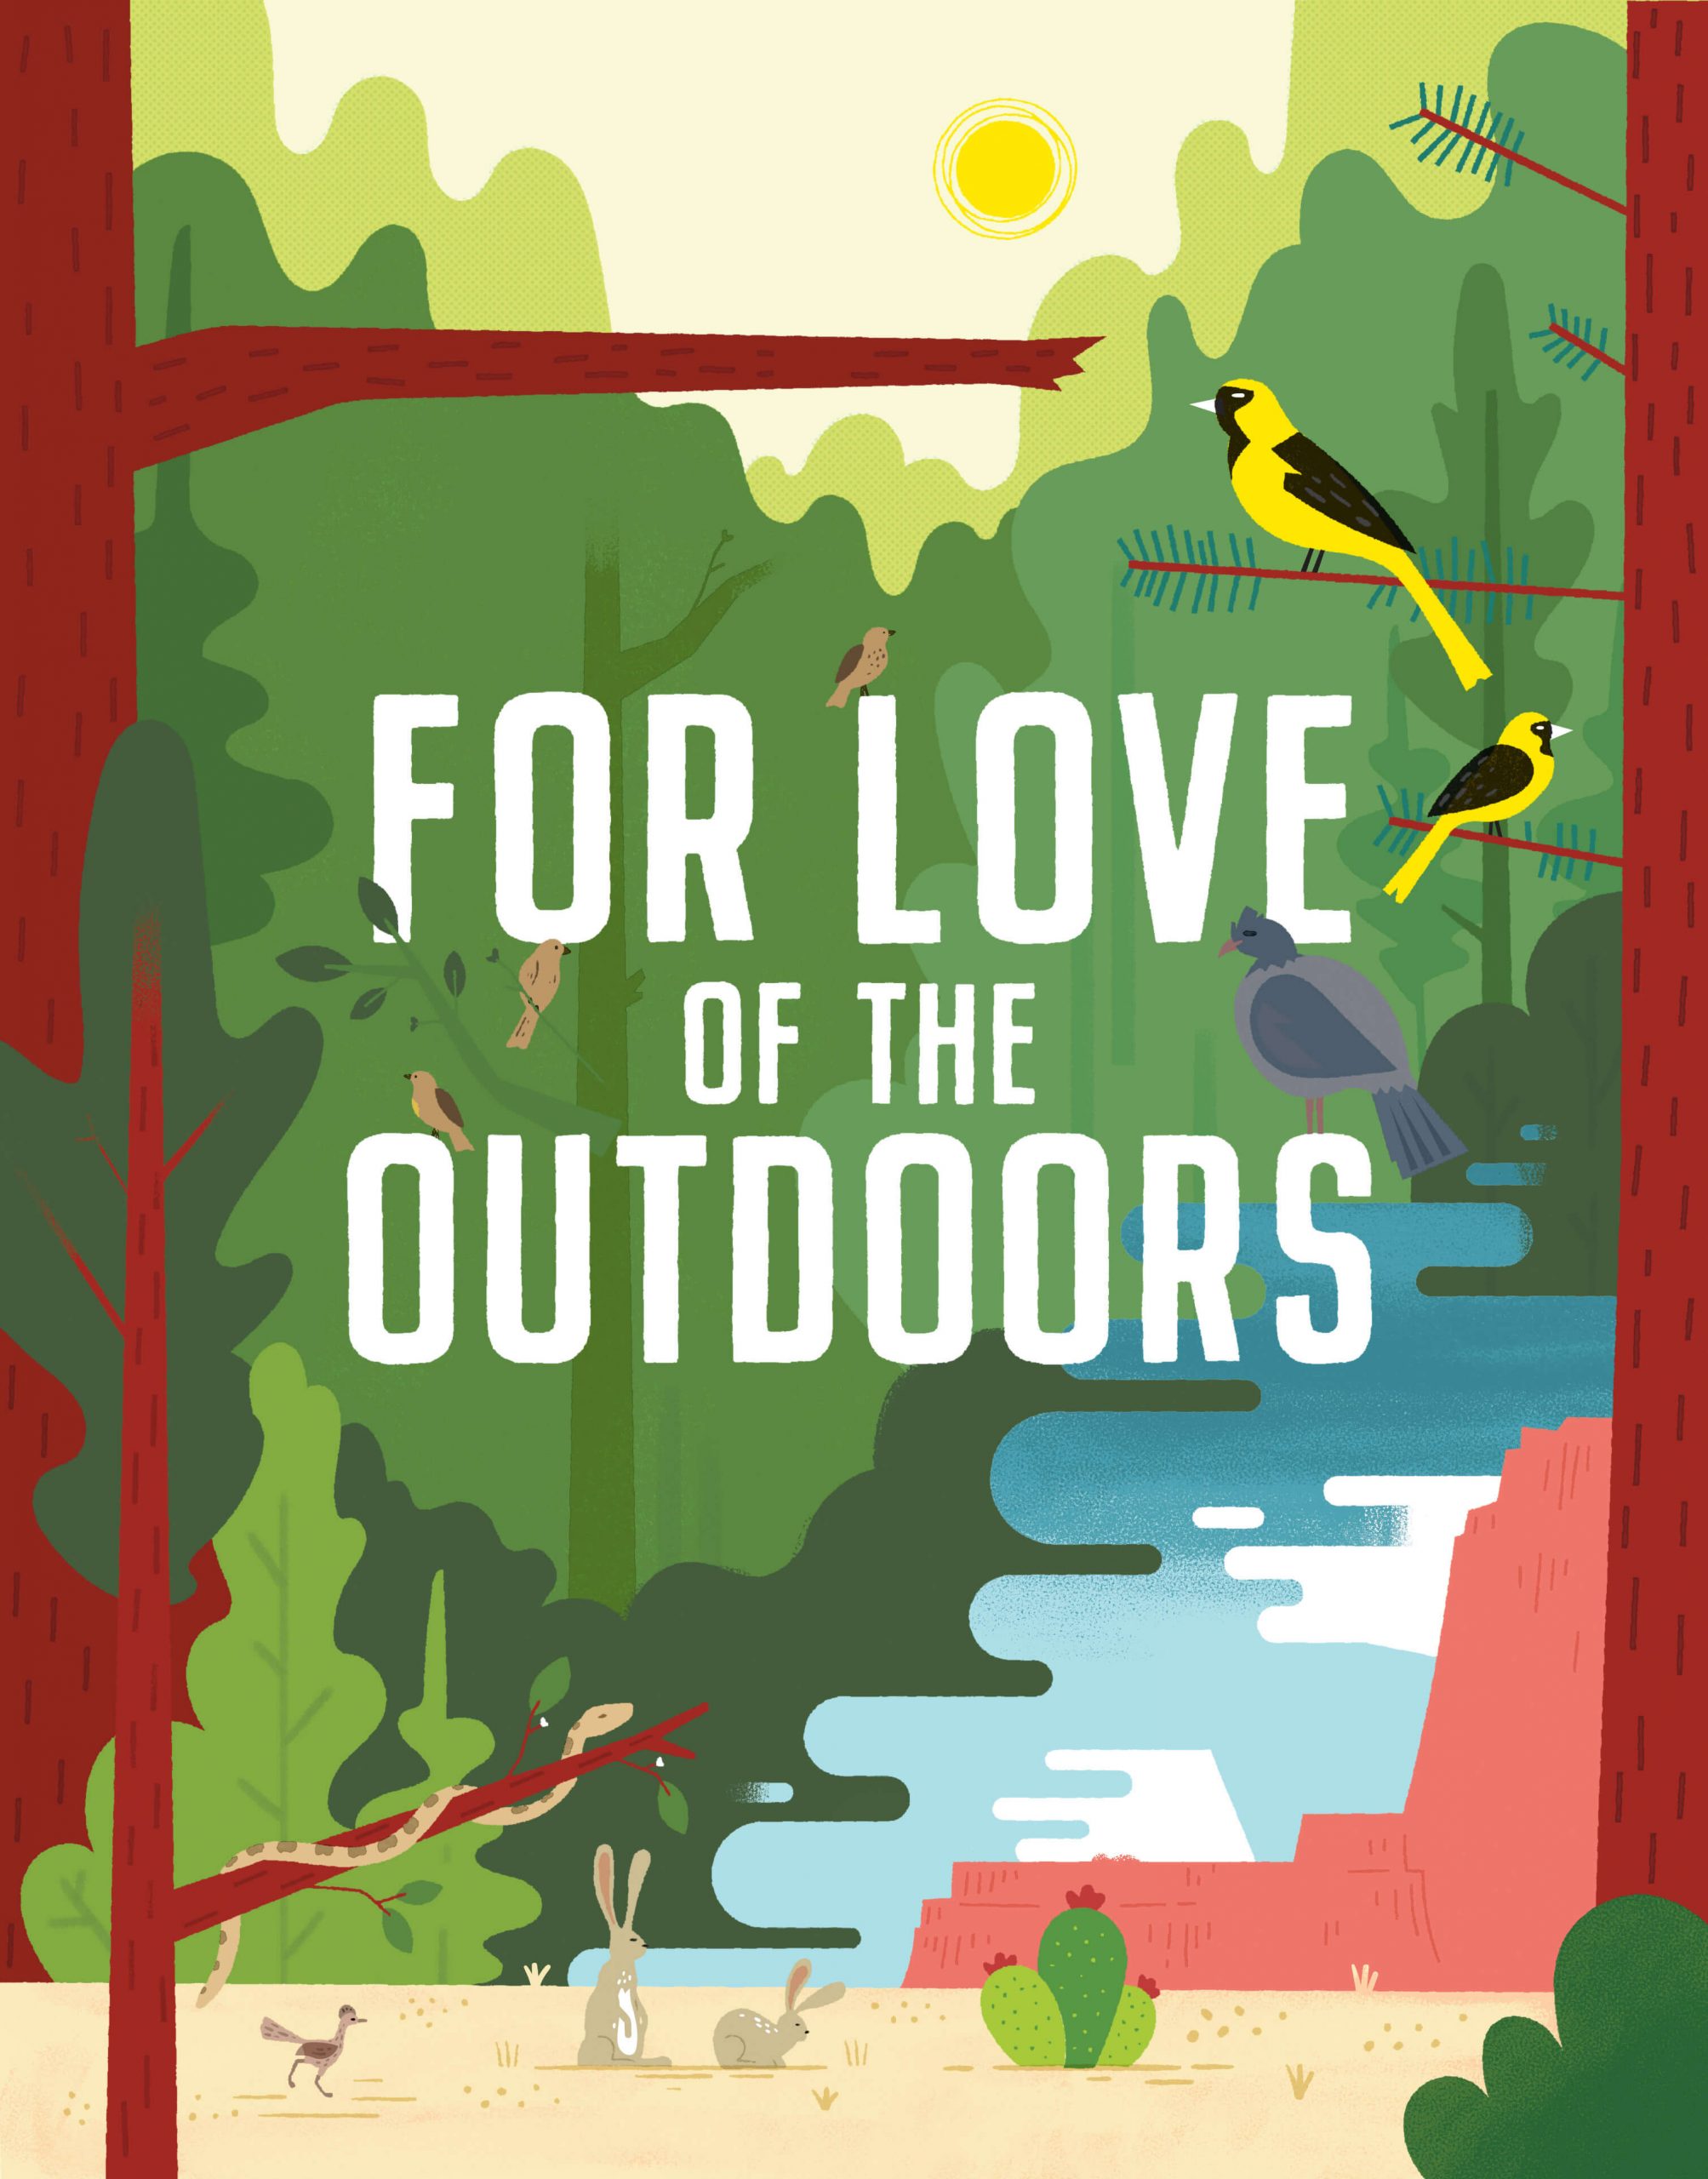 An illustration of a nature scene with birds, a river, trees and animals. Text reads For Love of the Outdoors.